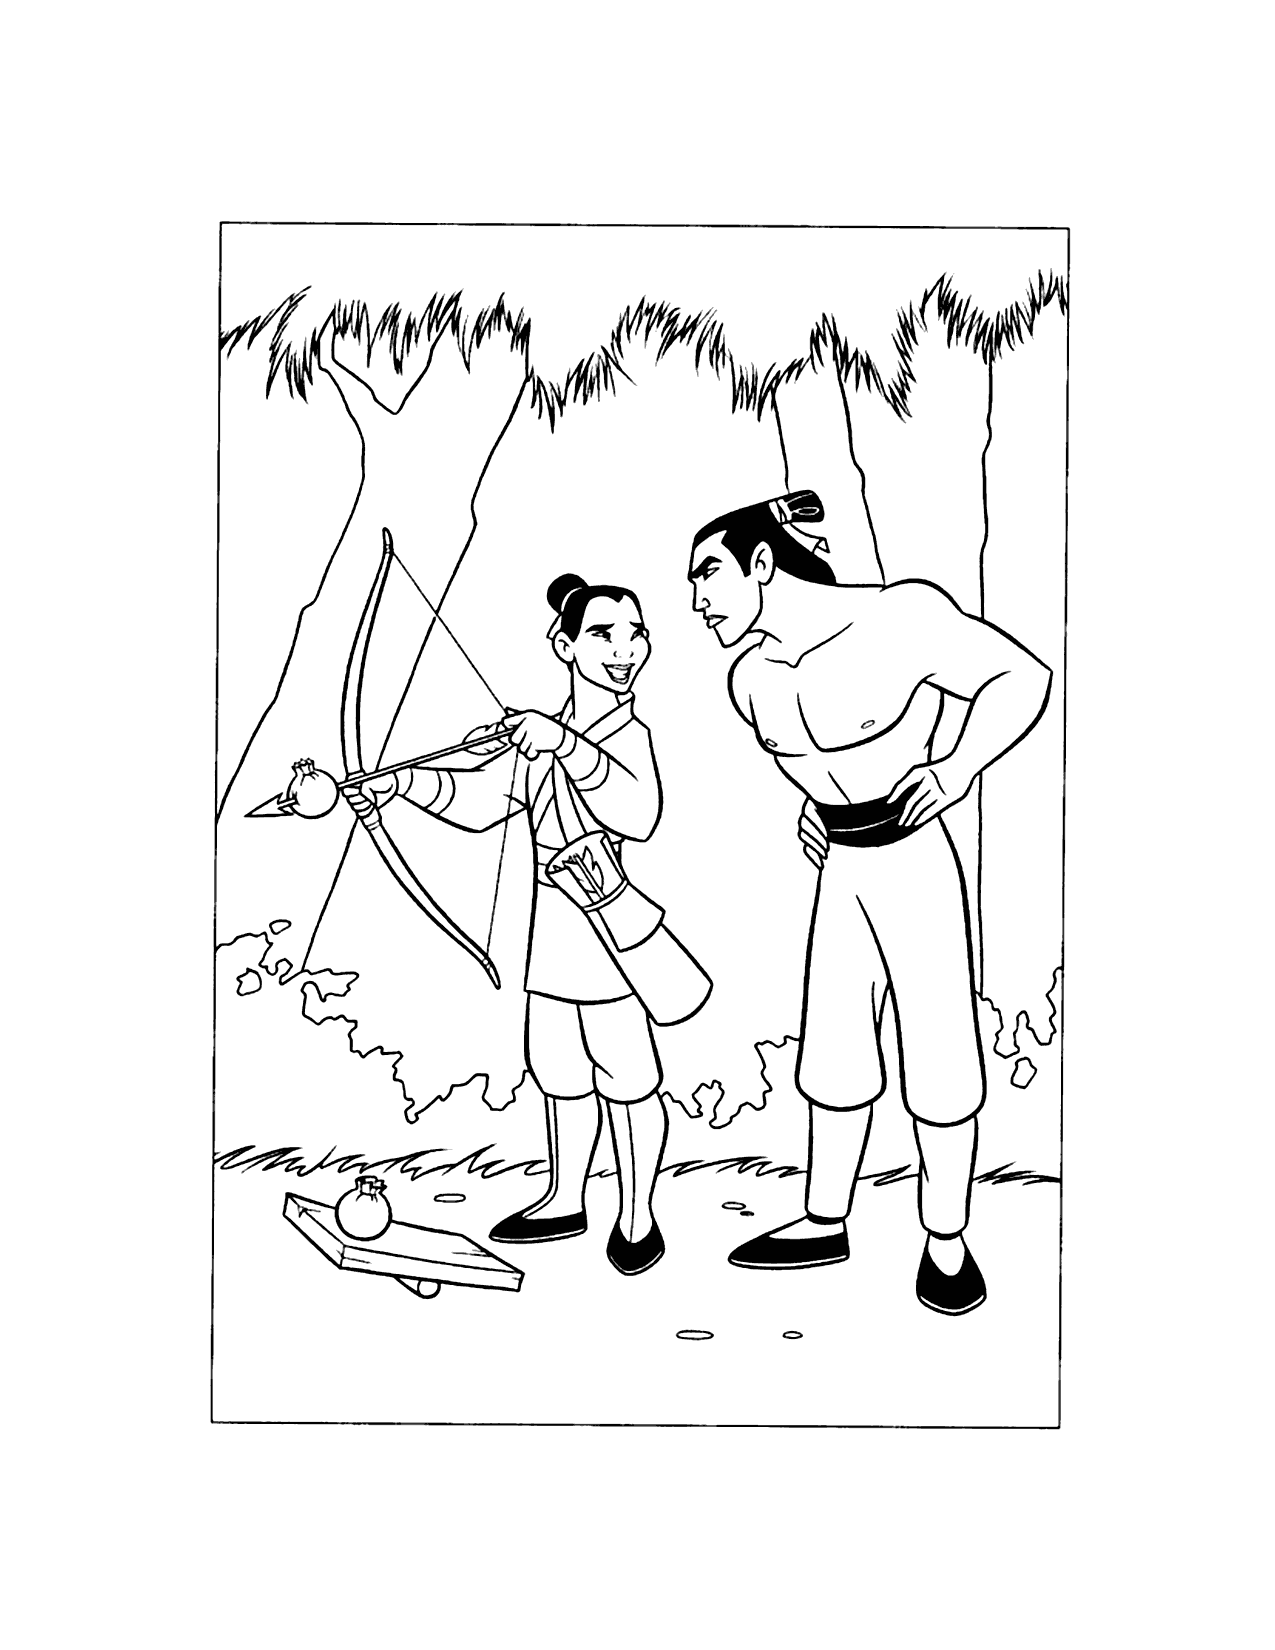 Mulan Learns To Shoot Arrows Coloring Page